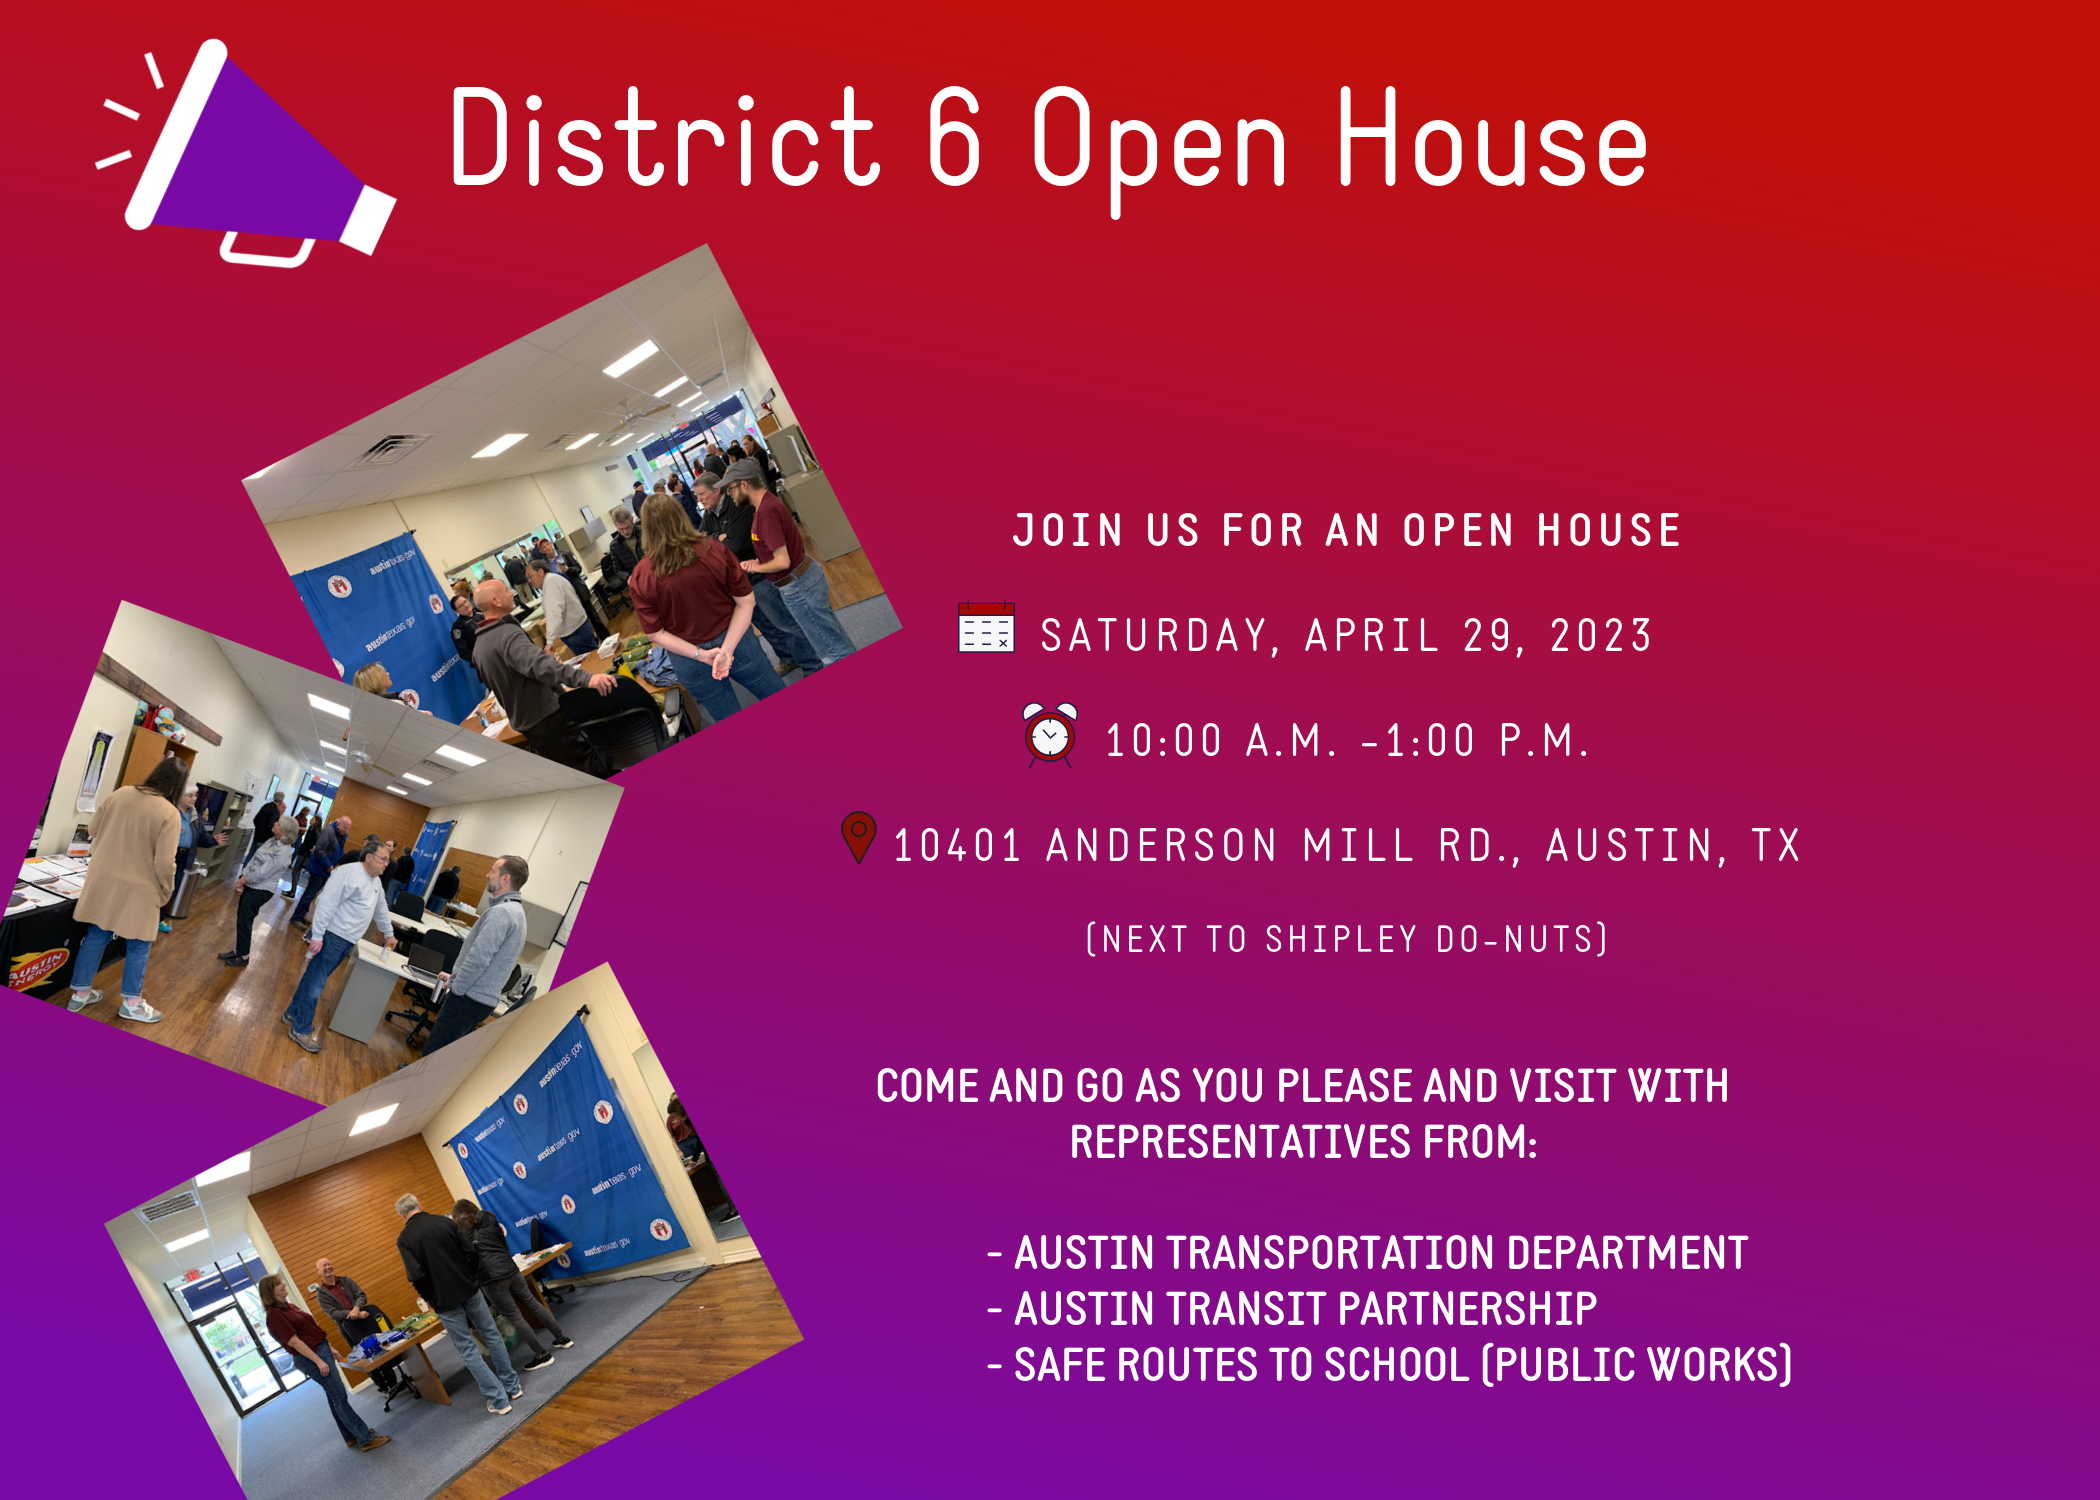 District 6 Open House